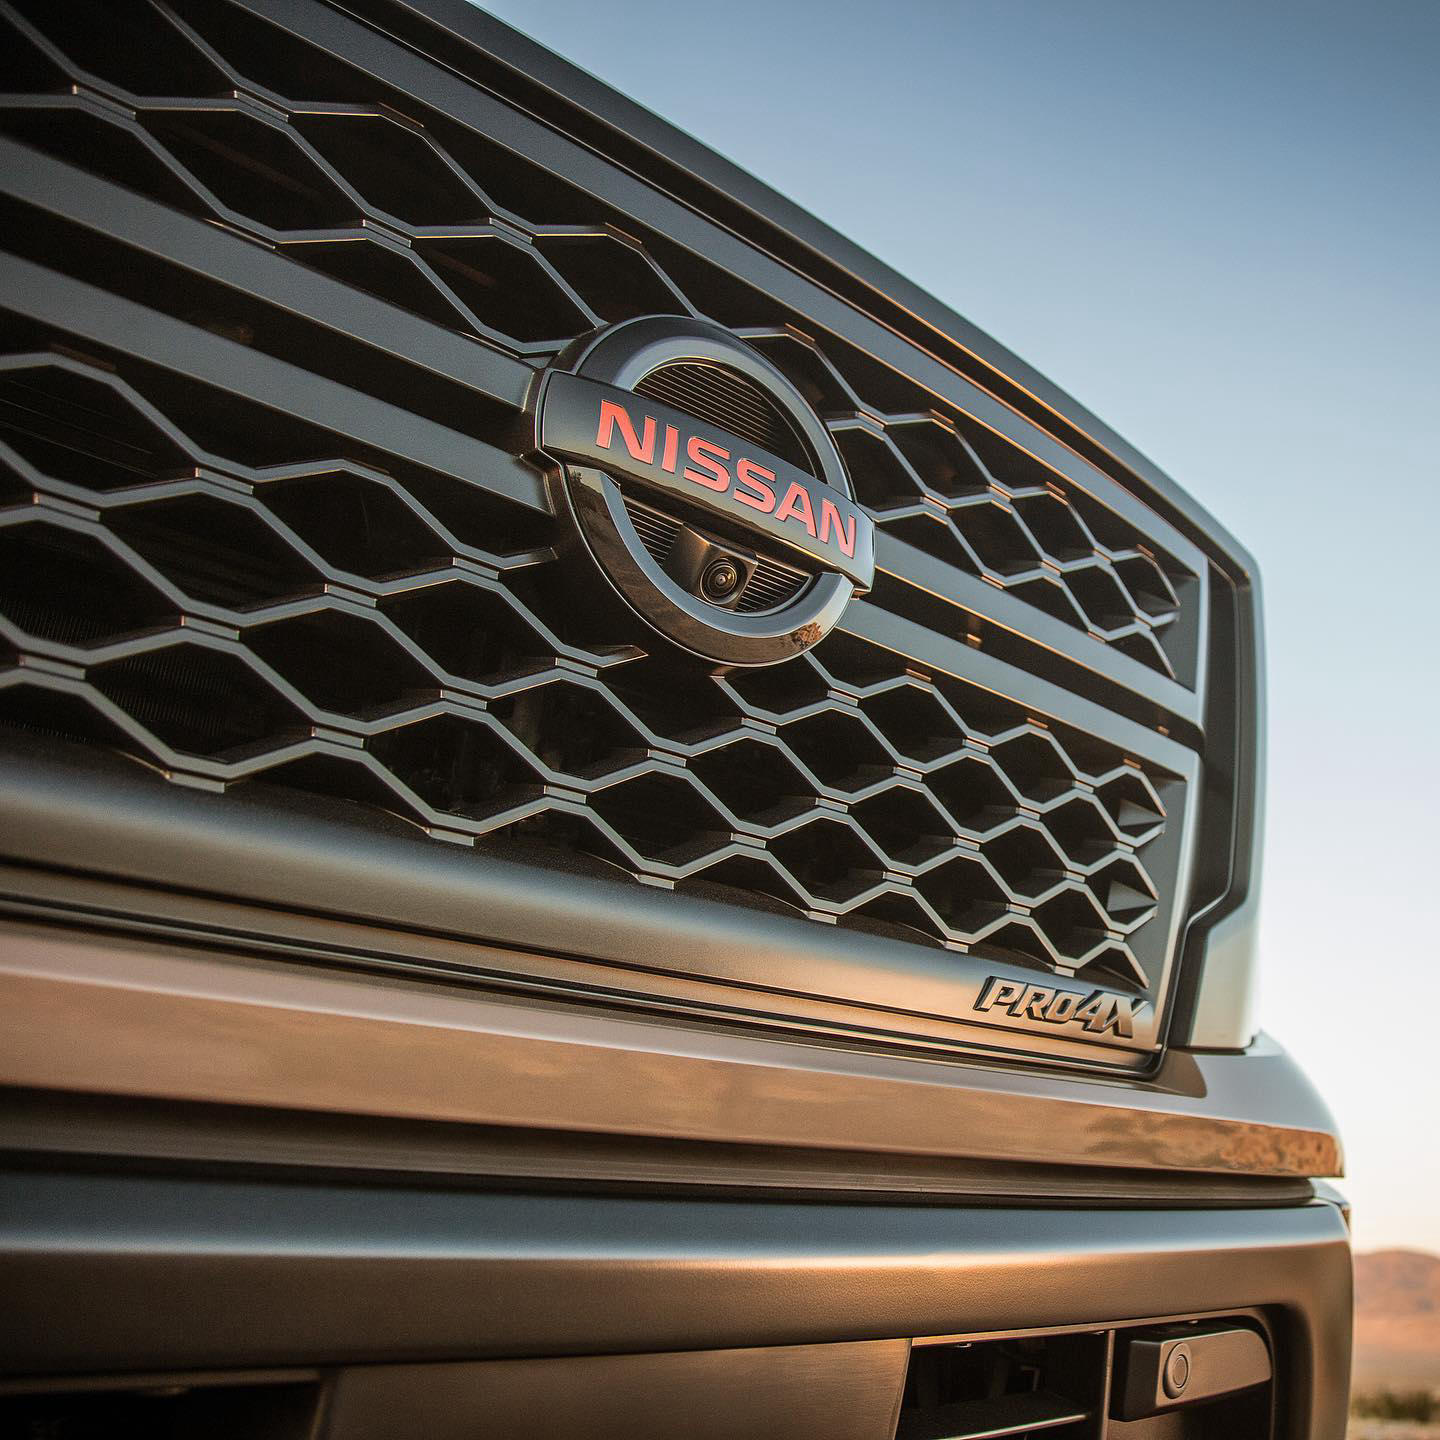 Nissan - An absolute machine of a truck, known for its power, strength and giant size…Can you #Guess